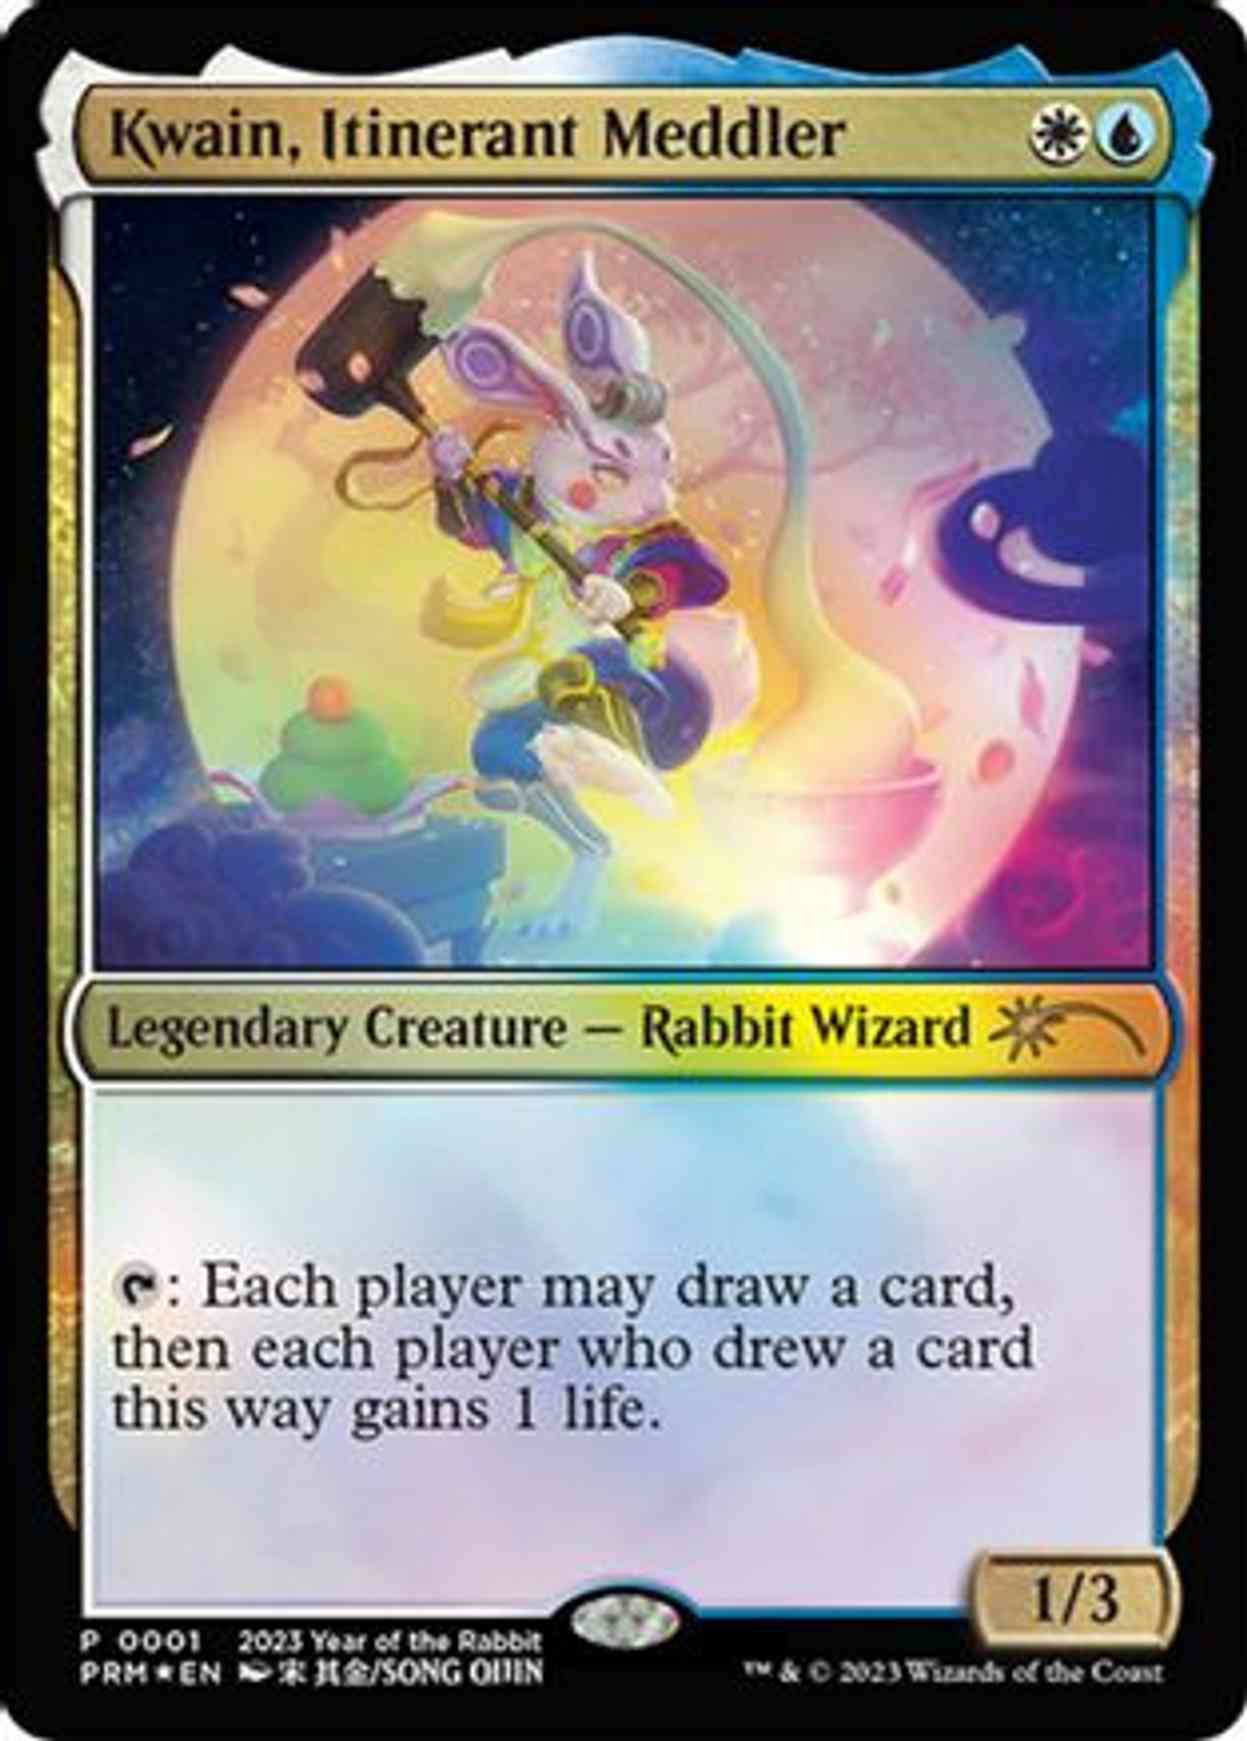 Kwain, Itinerant Meddler (Year of the Rabbit 2023) magic card front